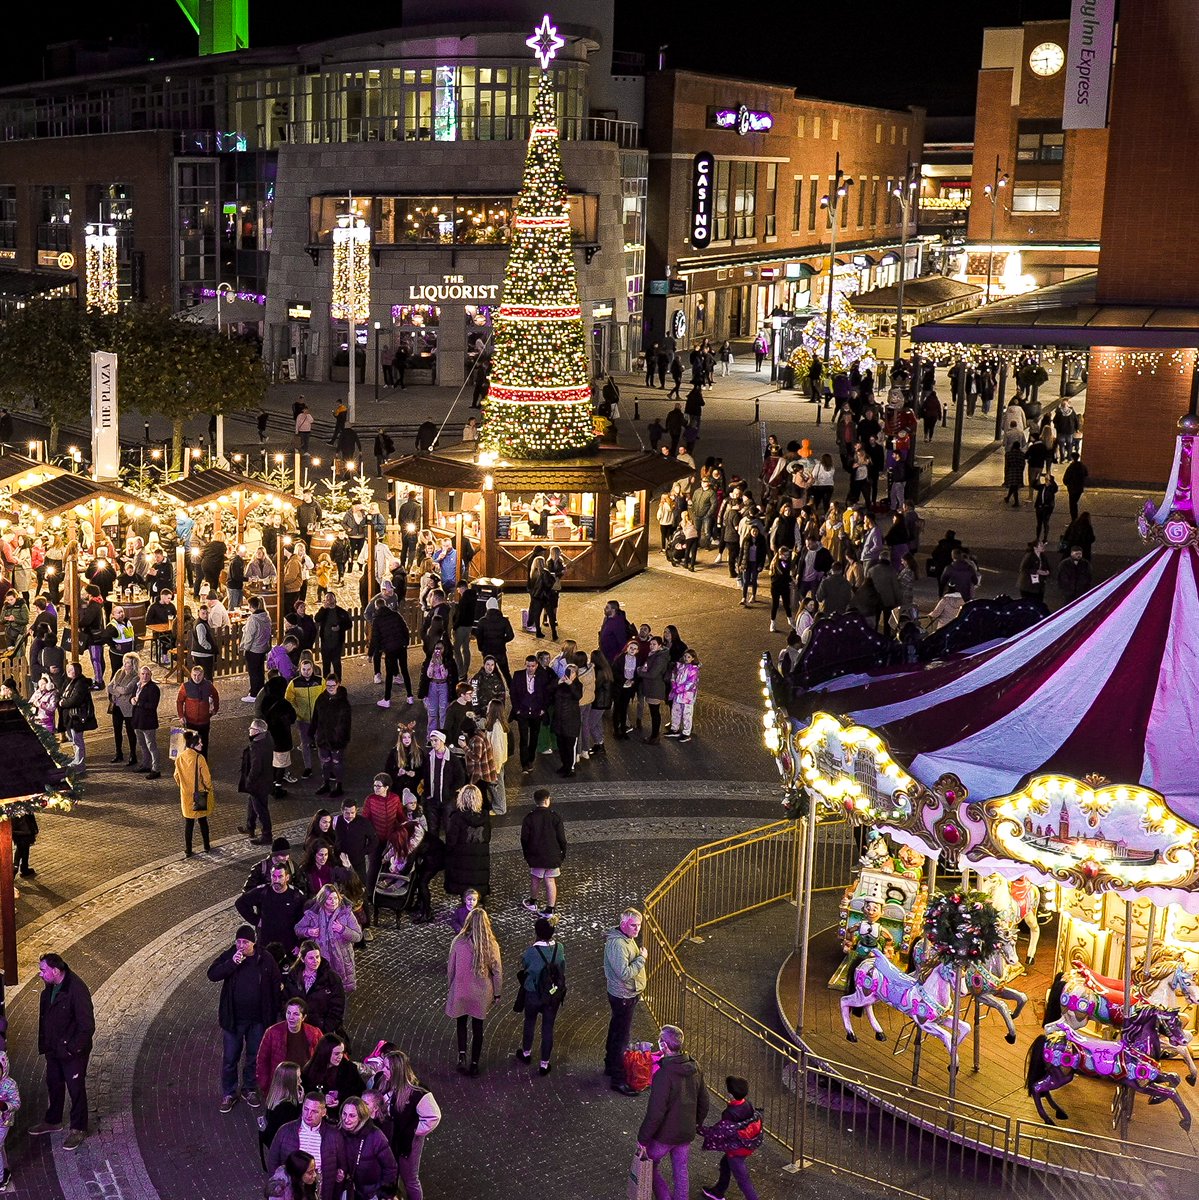 It won't be long until @GunwharfQuays will look like this again... ✨🎄🎅     Our #ChristmasVillage is set to reopen on the 12th November and we can't wait for all of the Christmas magic! 😍 Hands up, who's planning their visit already? 👋